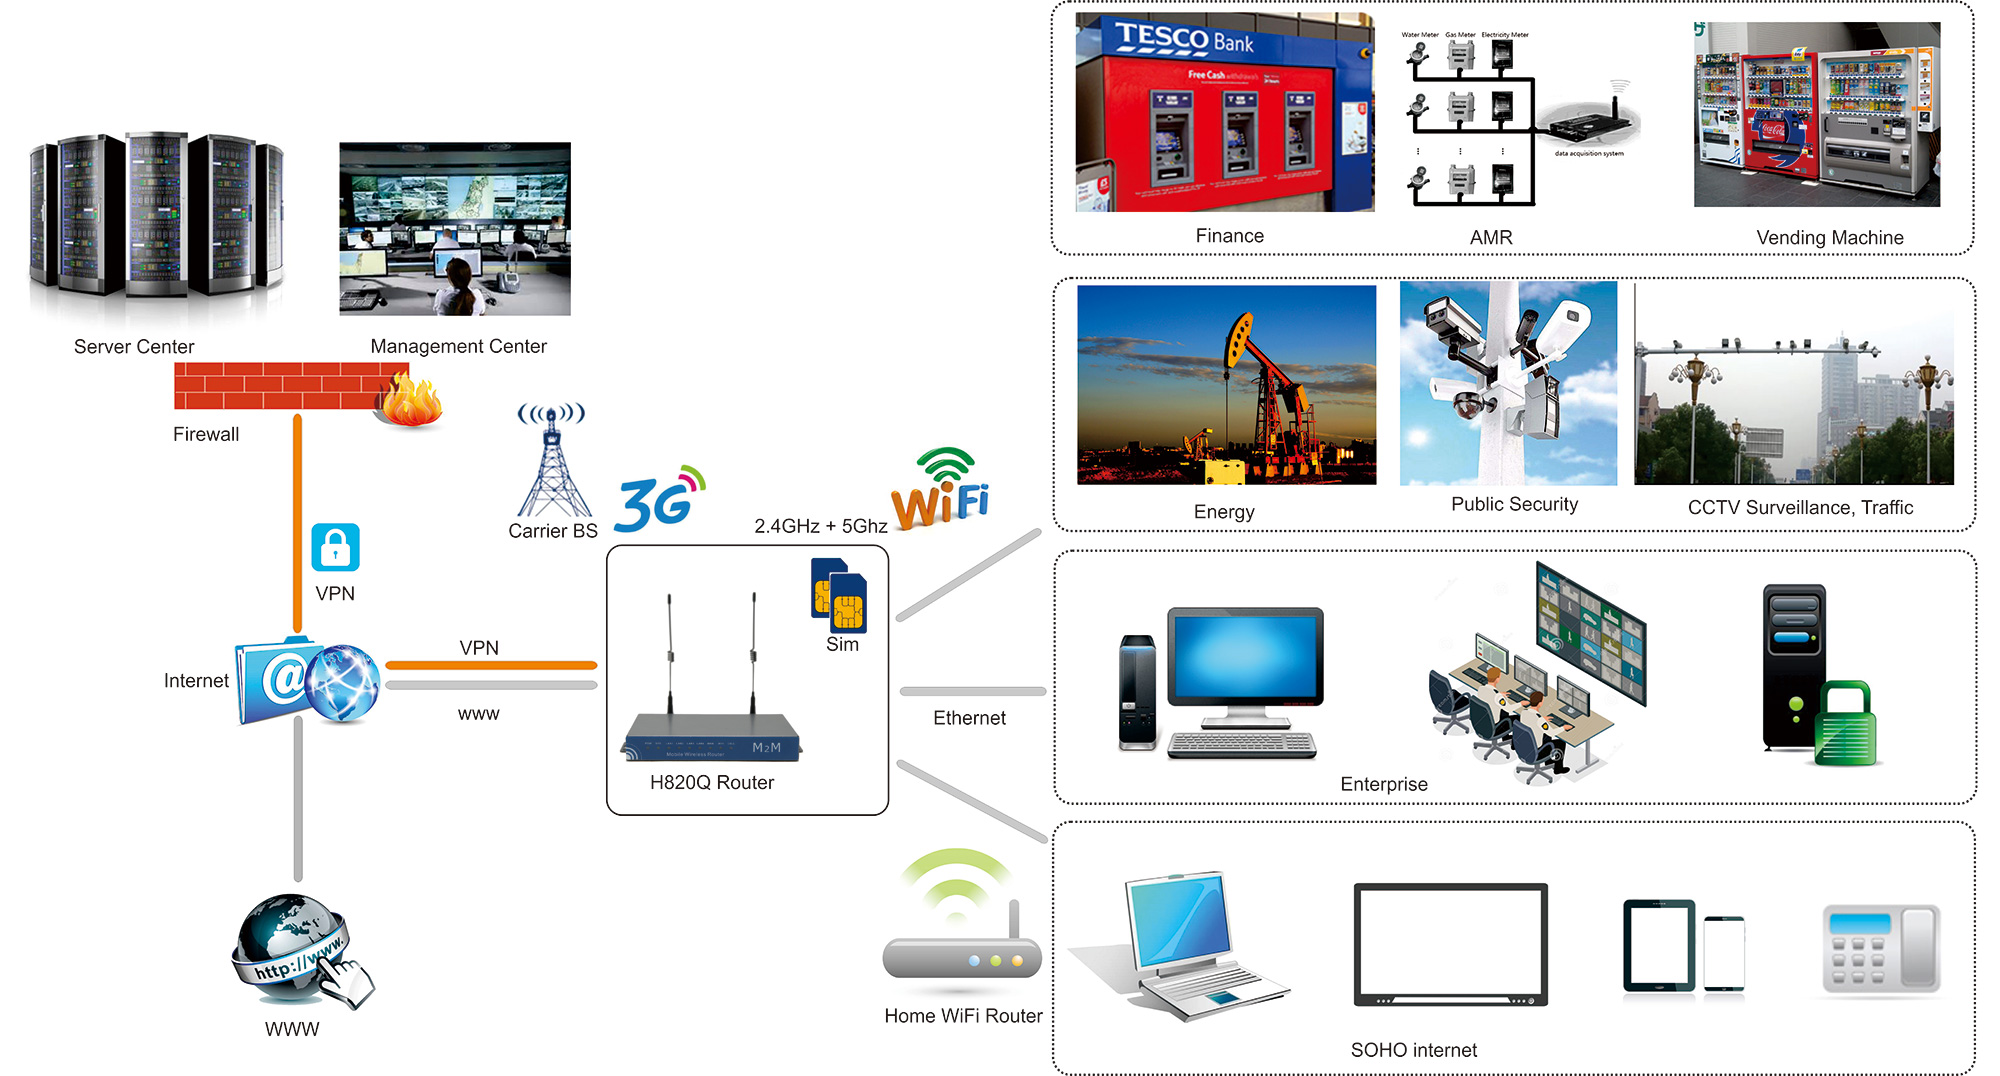 H820Q Dual WiFi 3G Router Typical Application Diagram